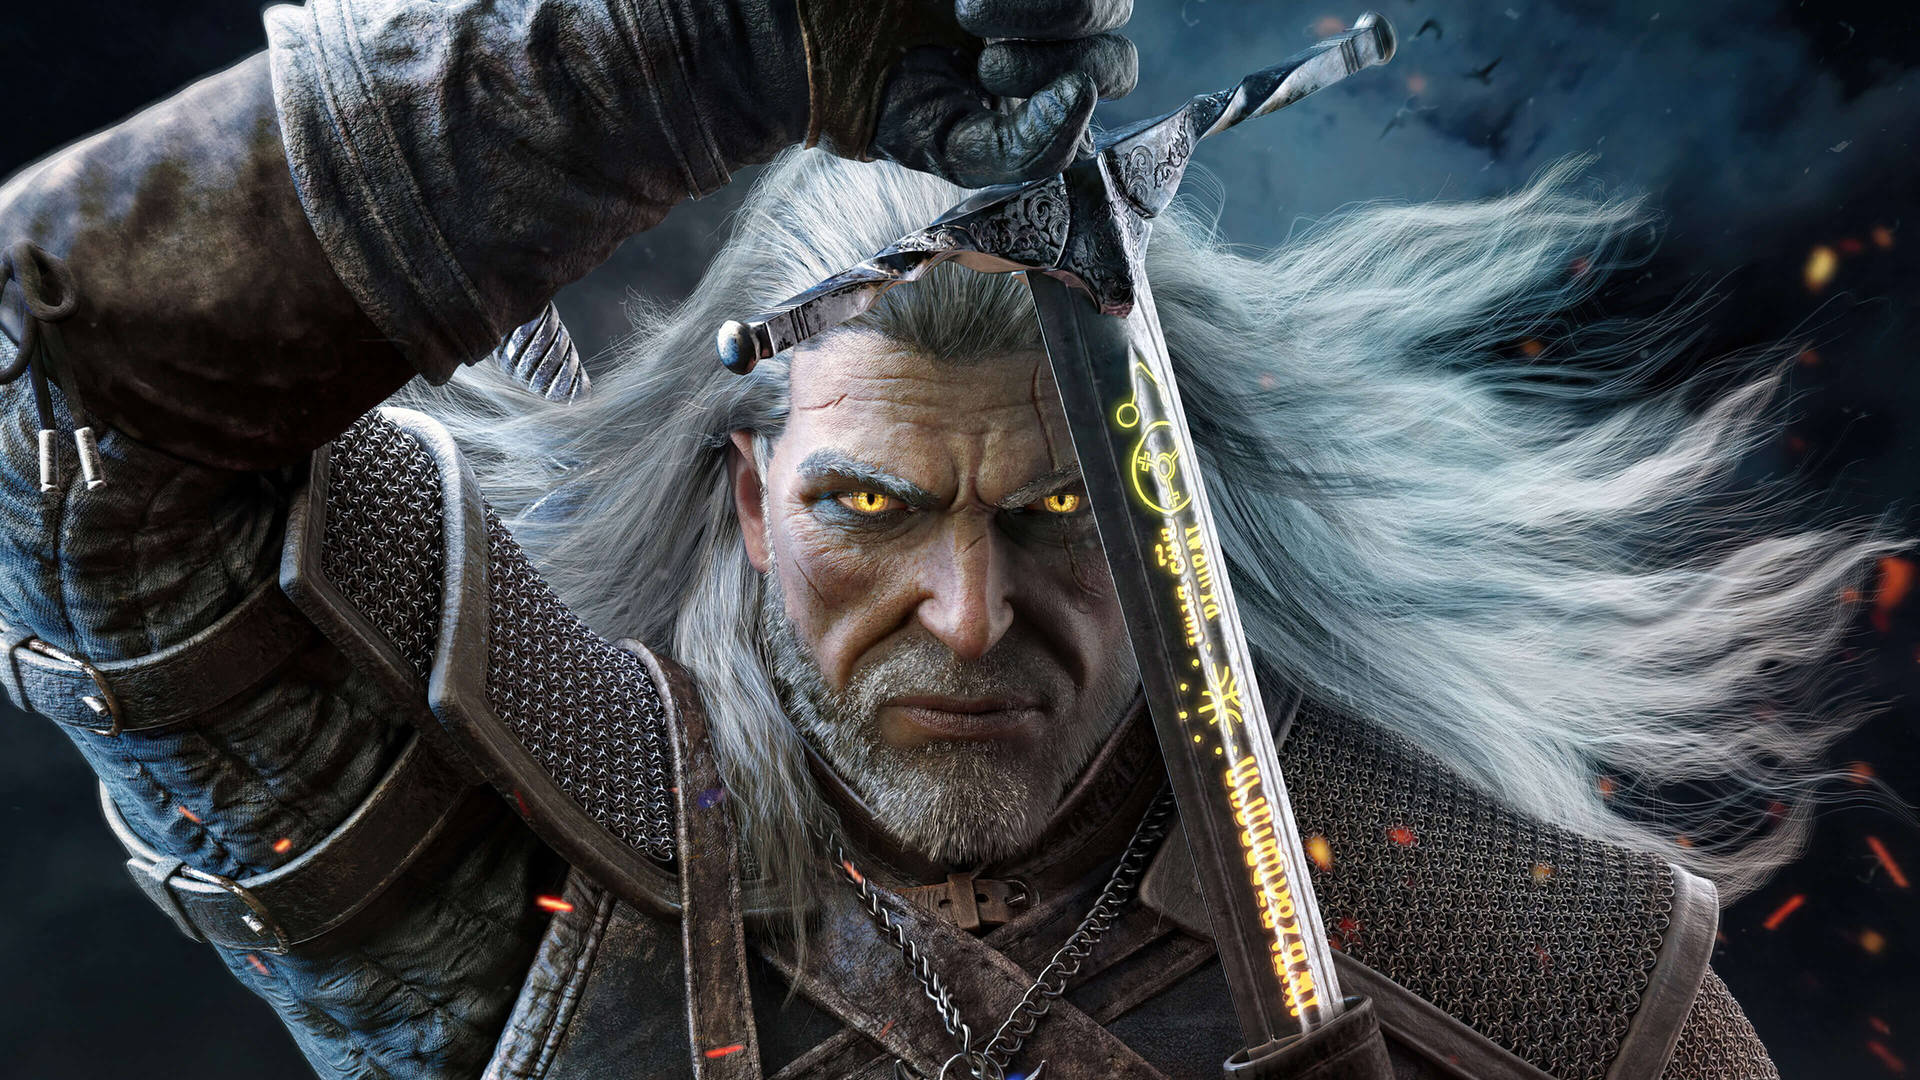 Top 999+ Witcher 3 Android Wallpaper Full HD, 4K✓Free to Use